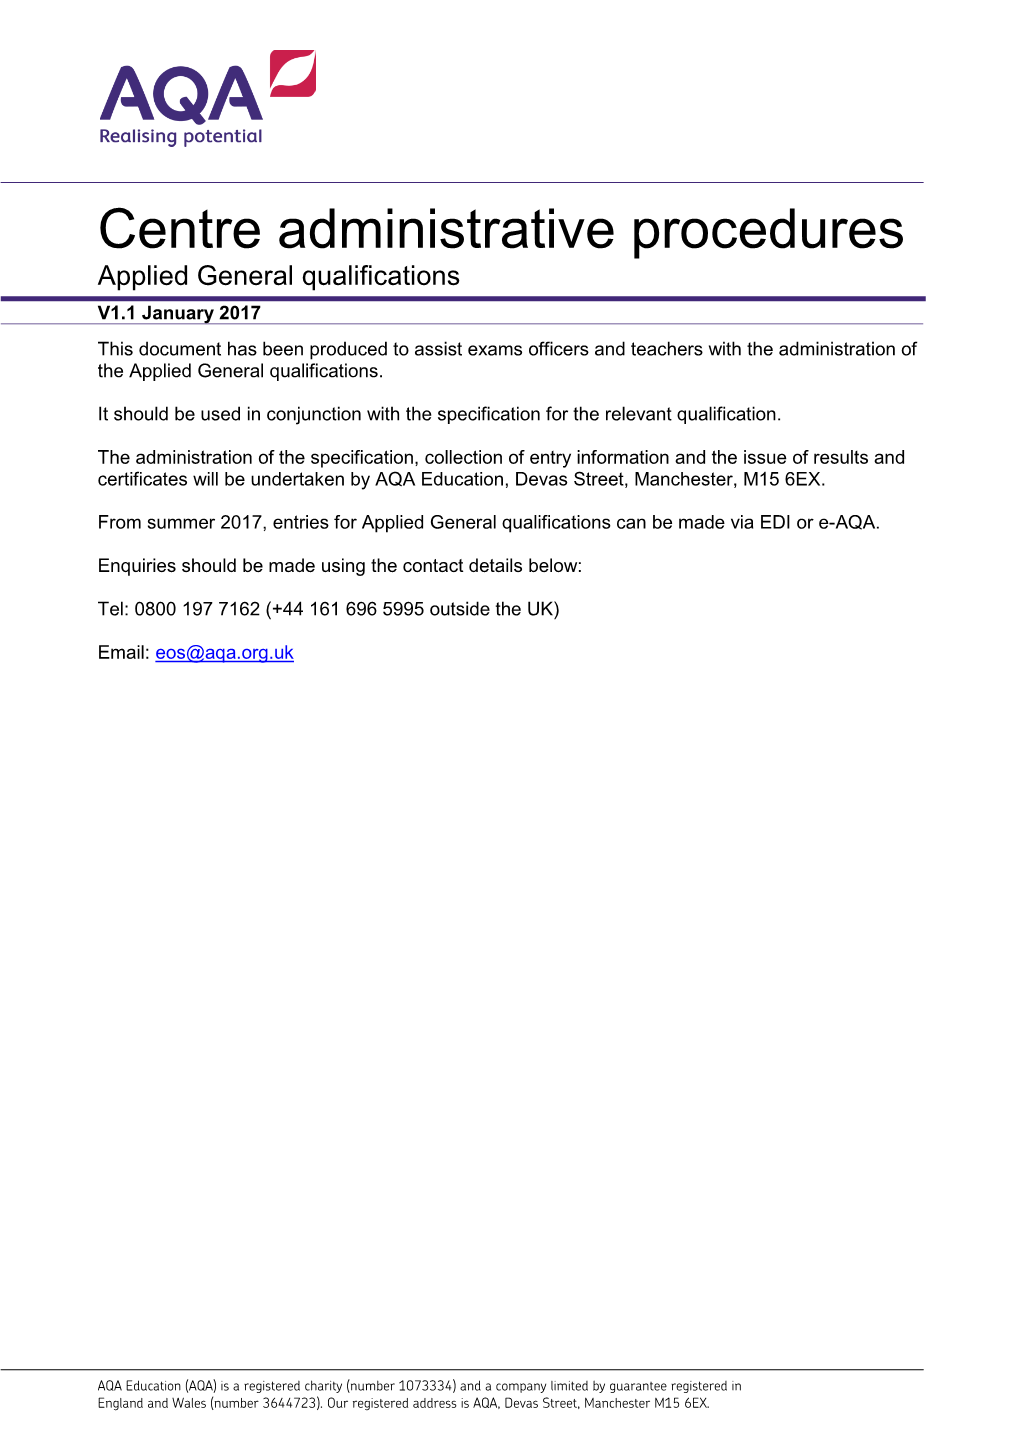 Applied General Qualifications Centre Administrative Procedures